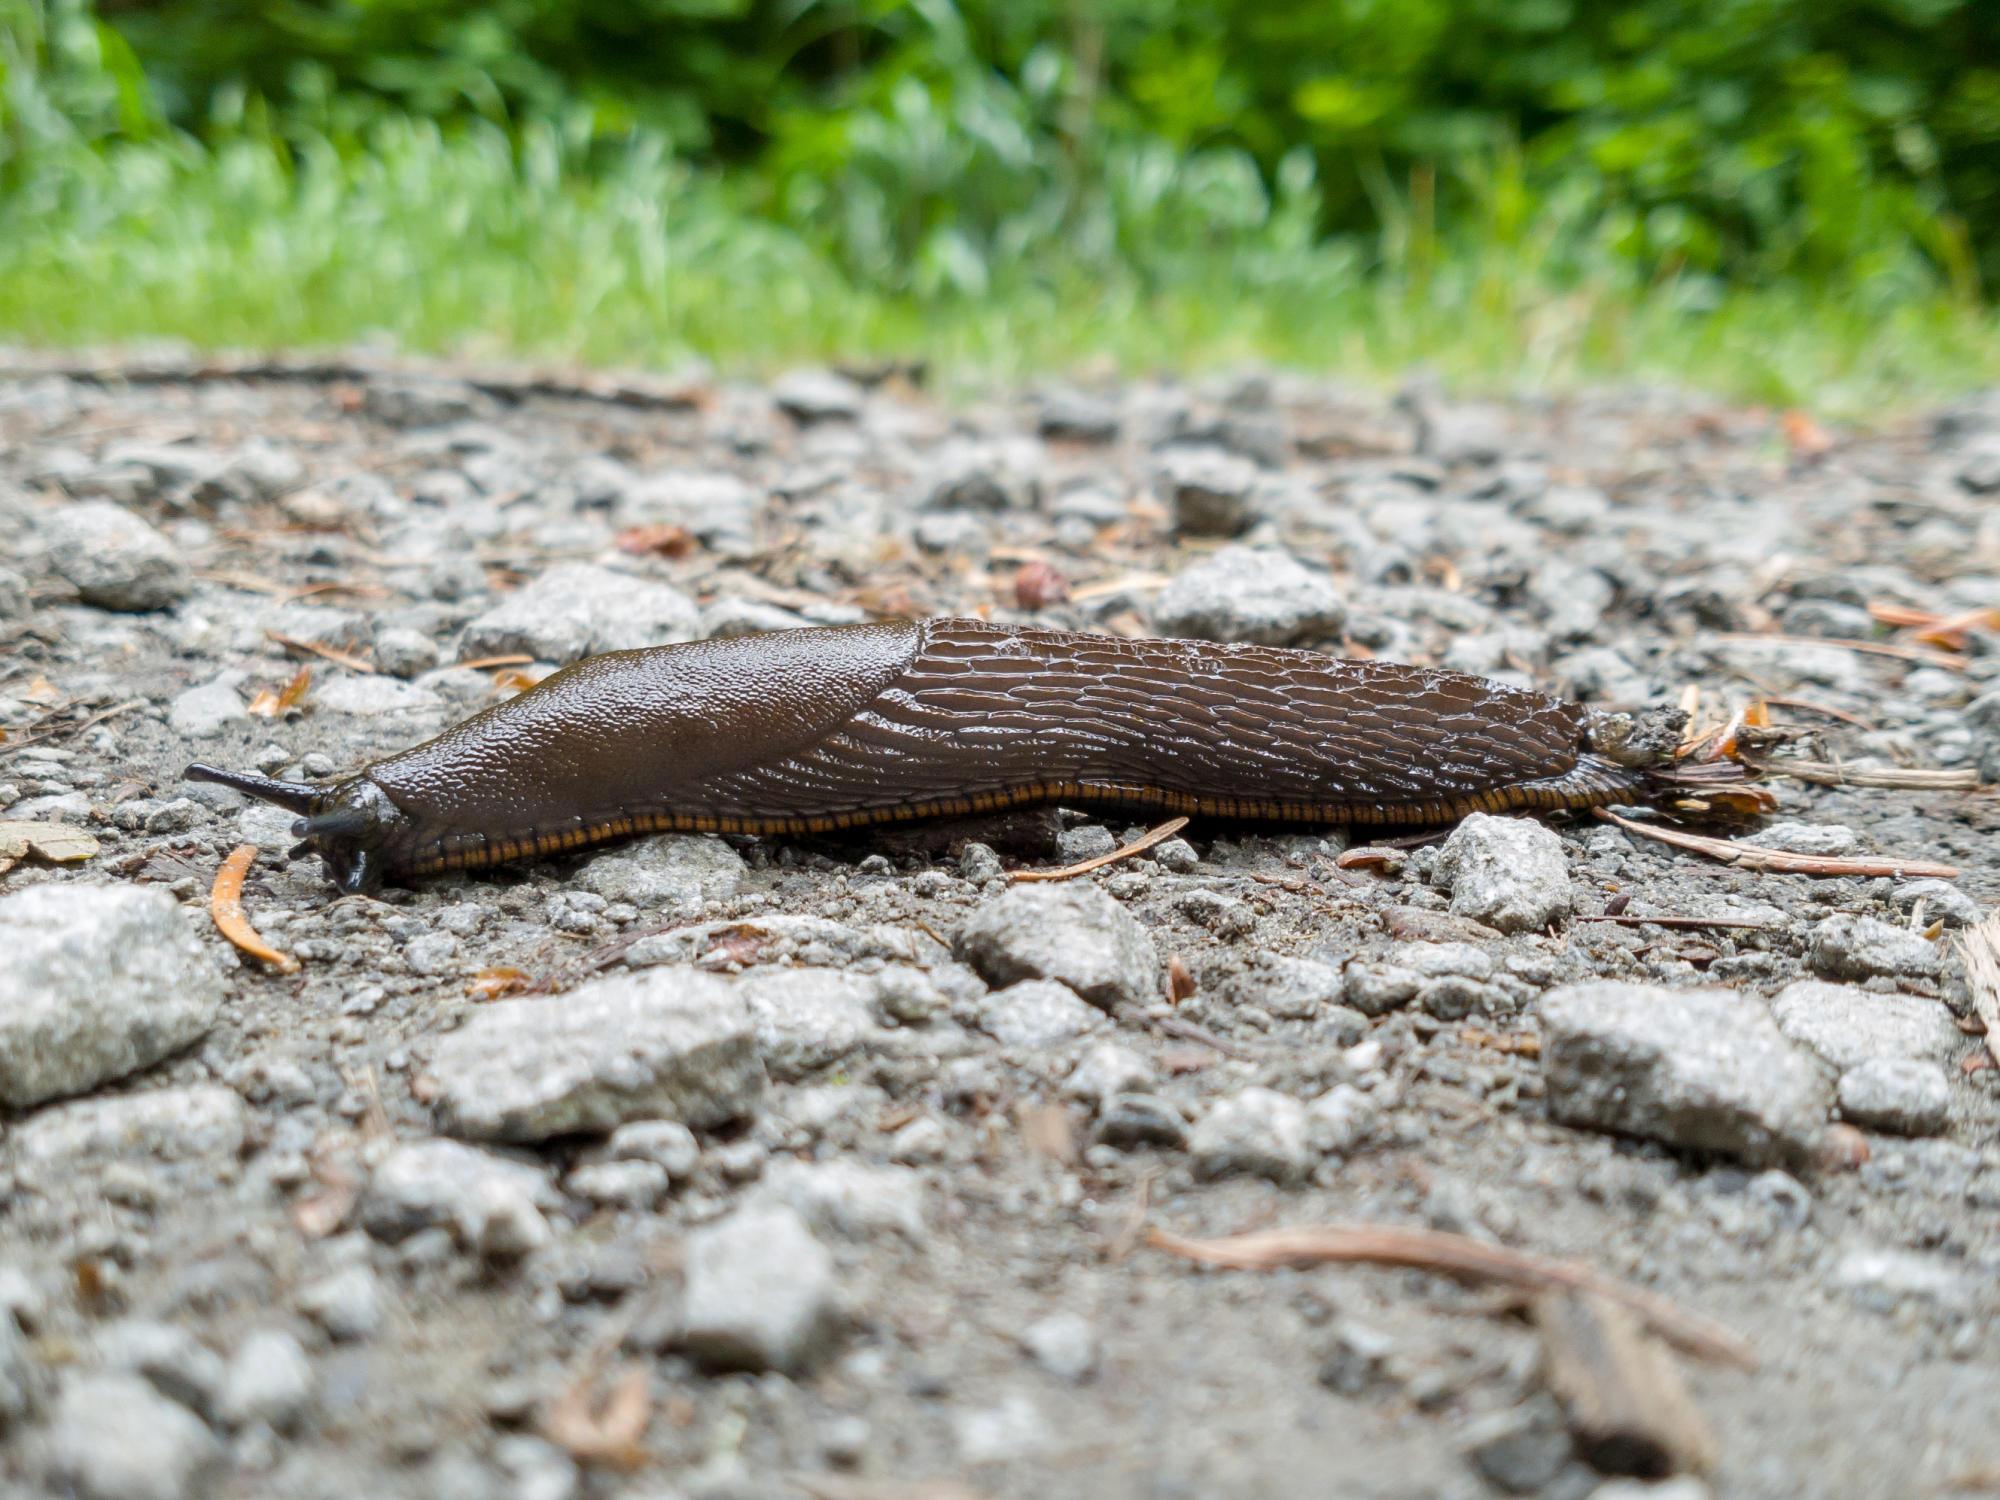 A European Red Slug moves along a gravel pathway in McDonald Forest